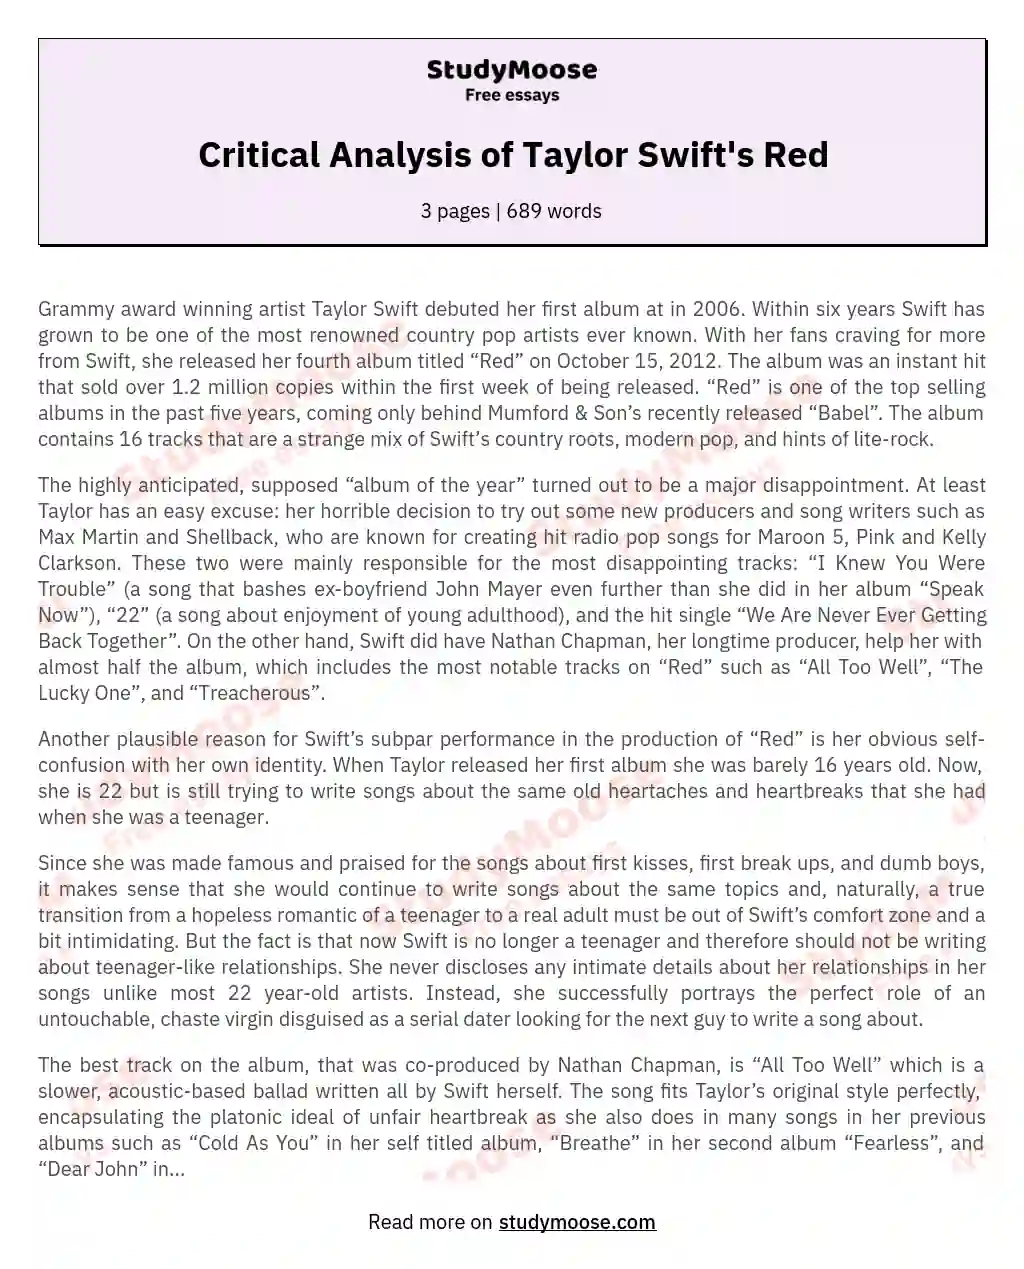 extended essay on taylor swift